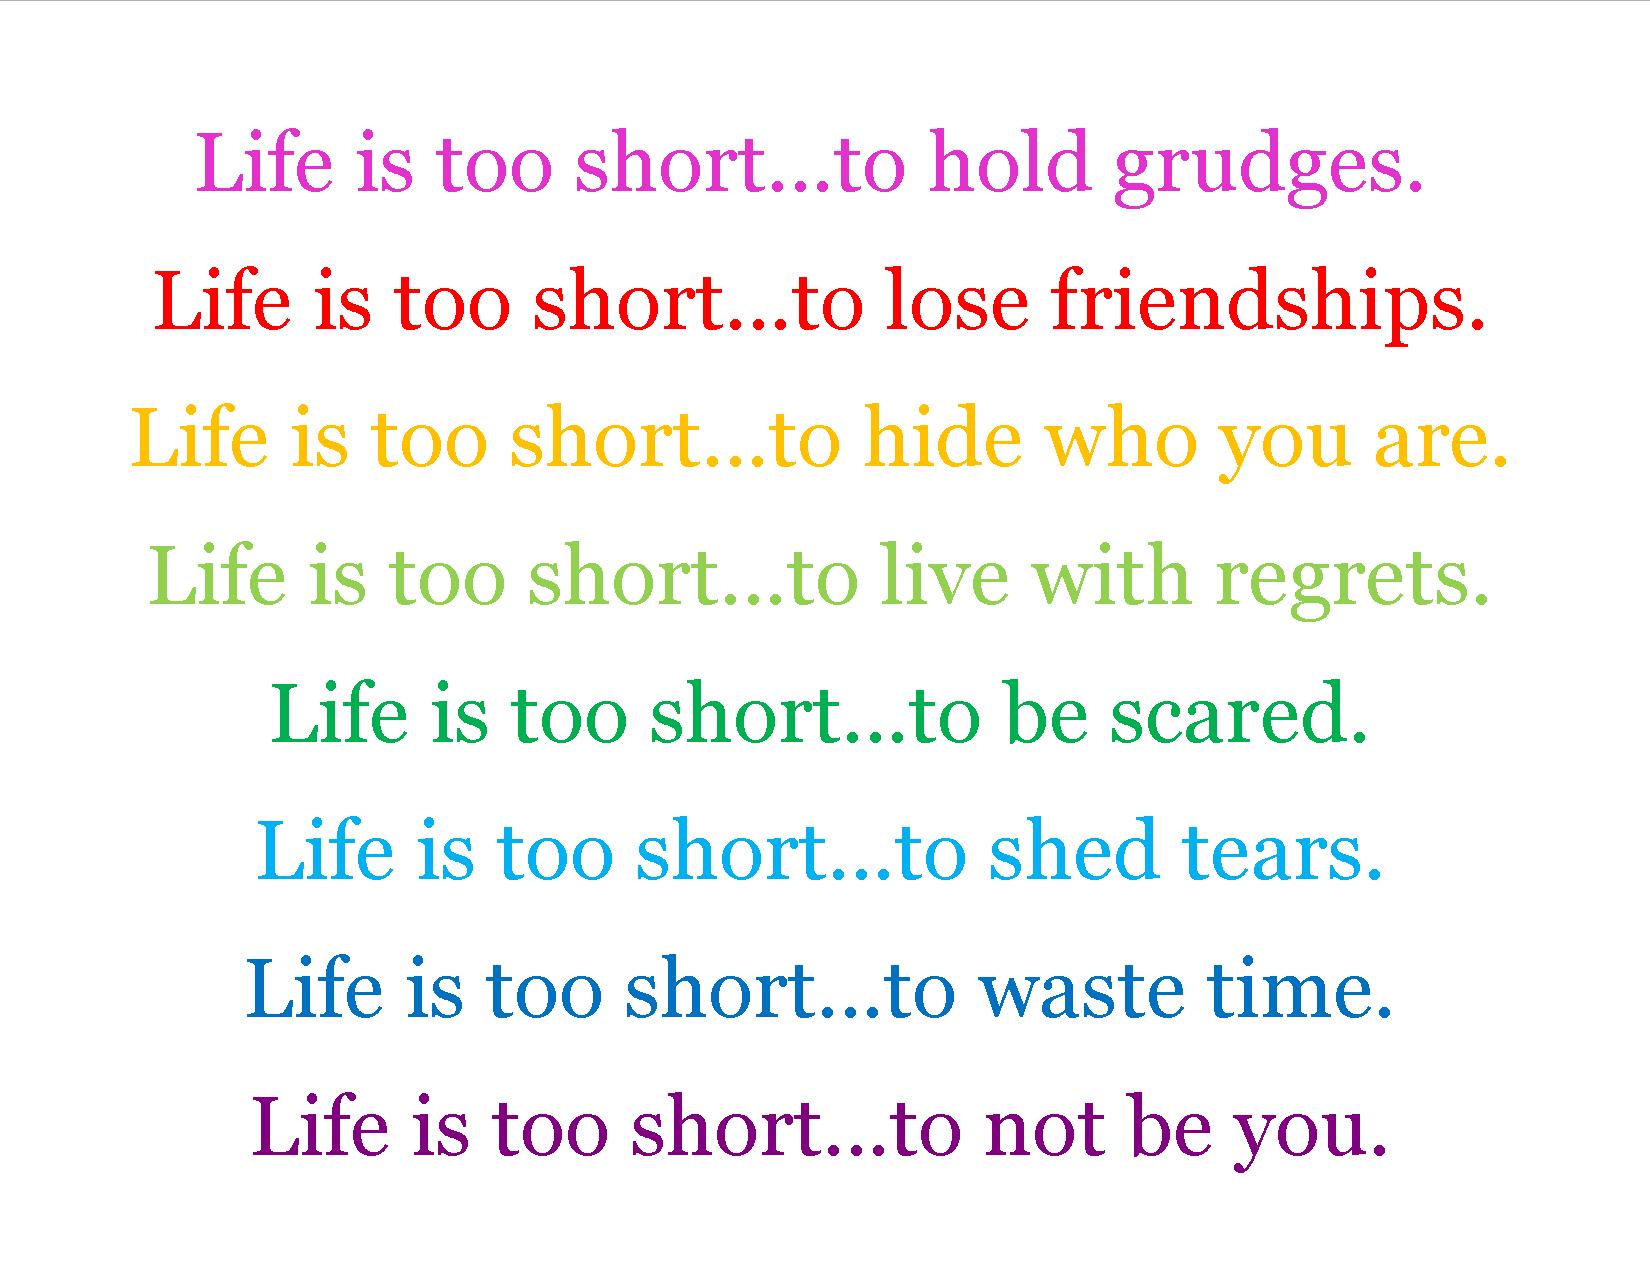 life-is-too-short-quotes1.jpg